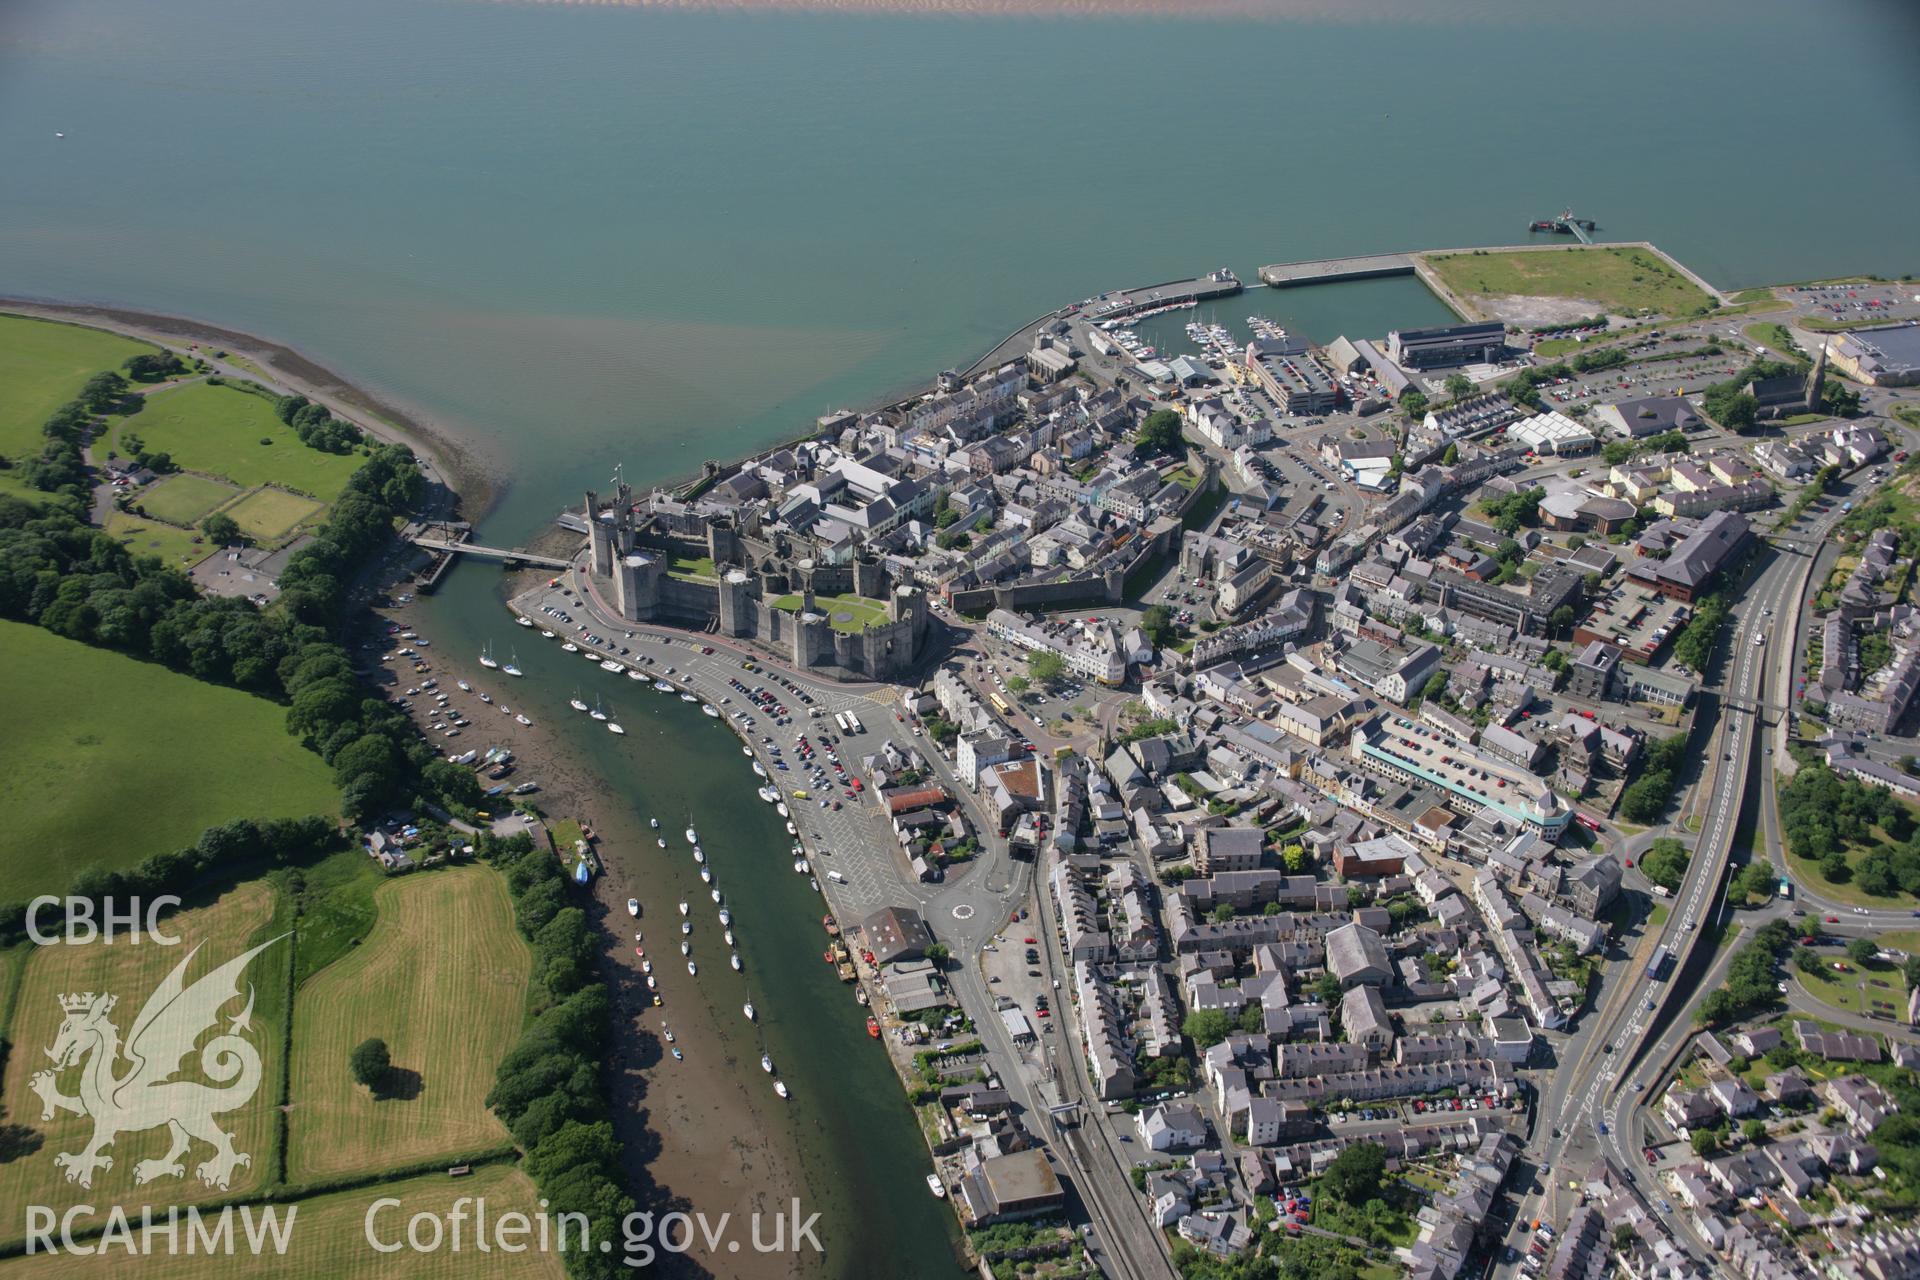 RCAHMW colour oblique aerial photograph of Caernarfon Castle and the walled town from the south-east. Taken on 14 June 2006 by Toby Driver.